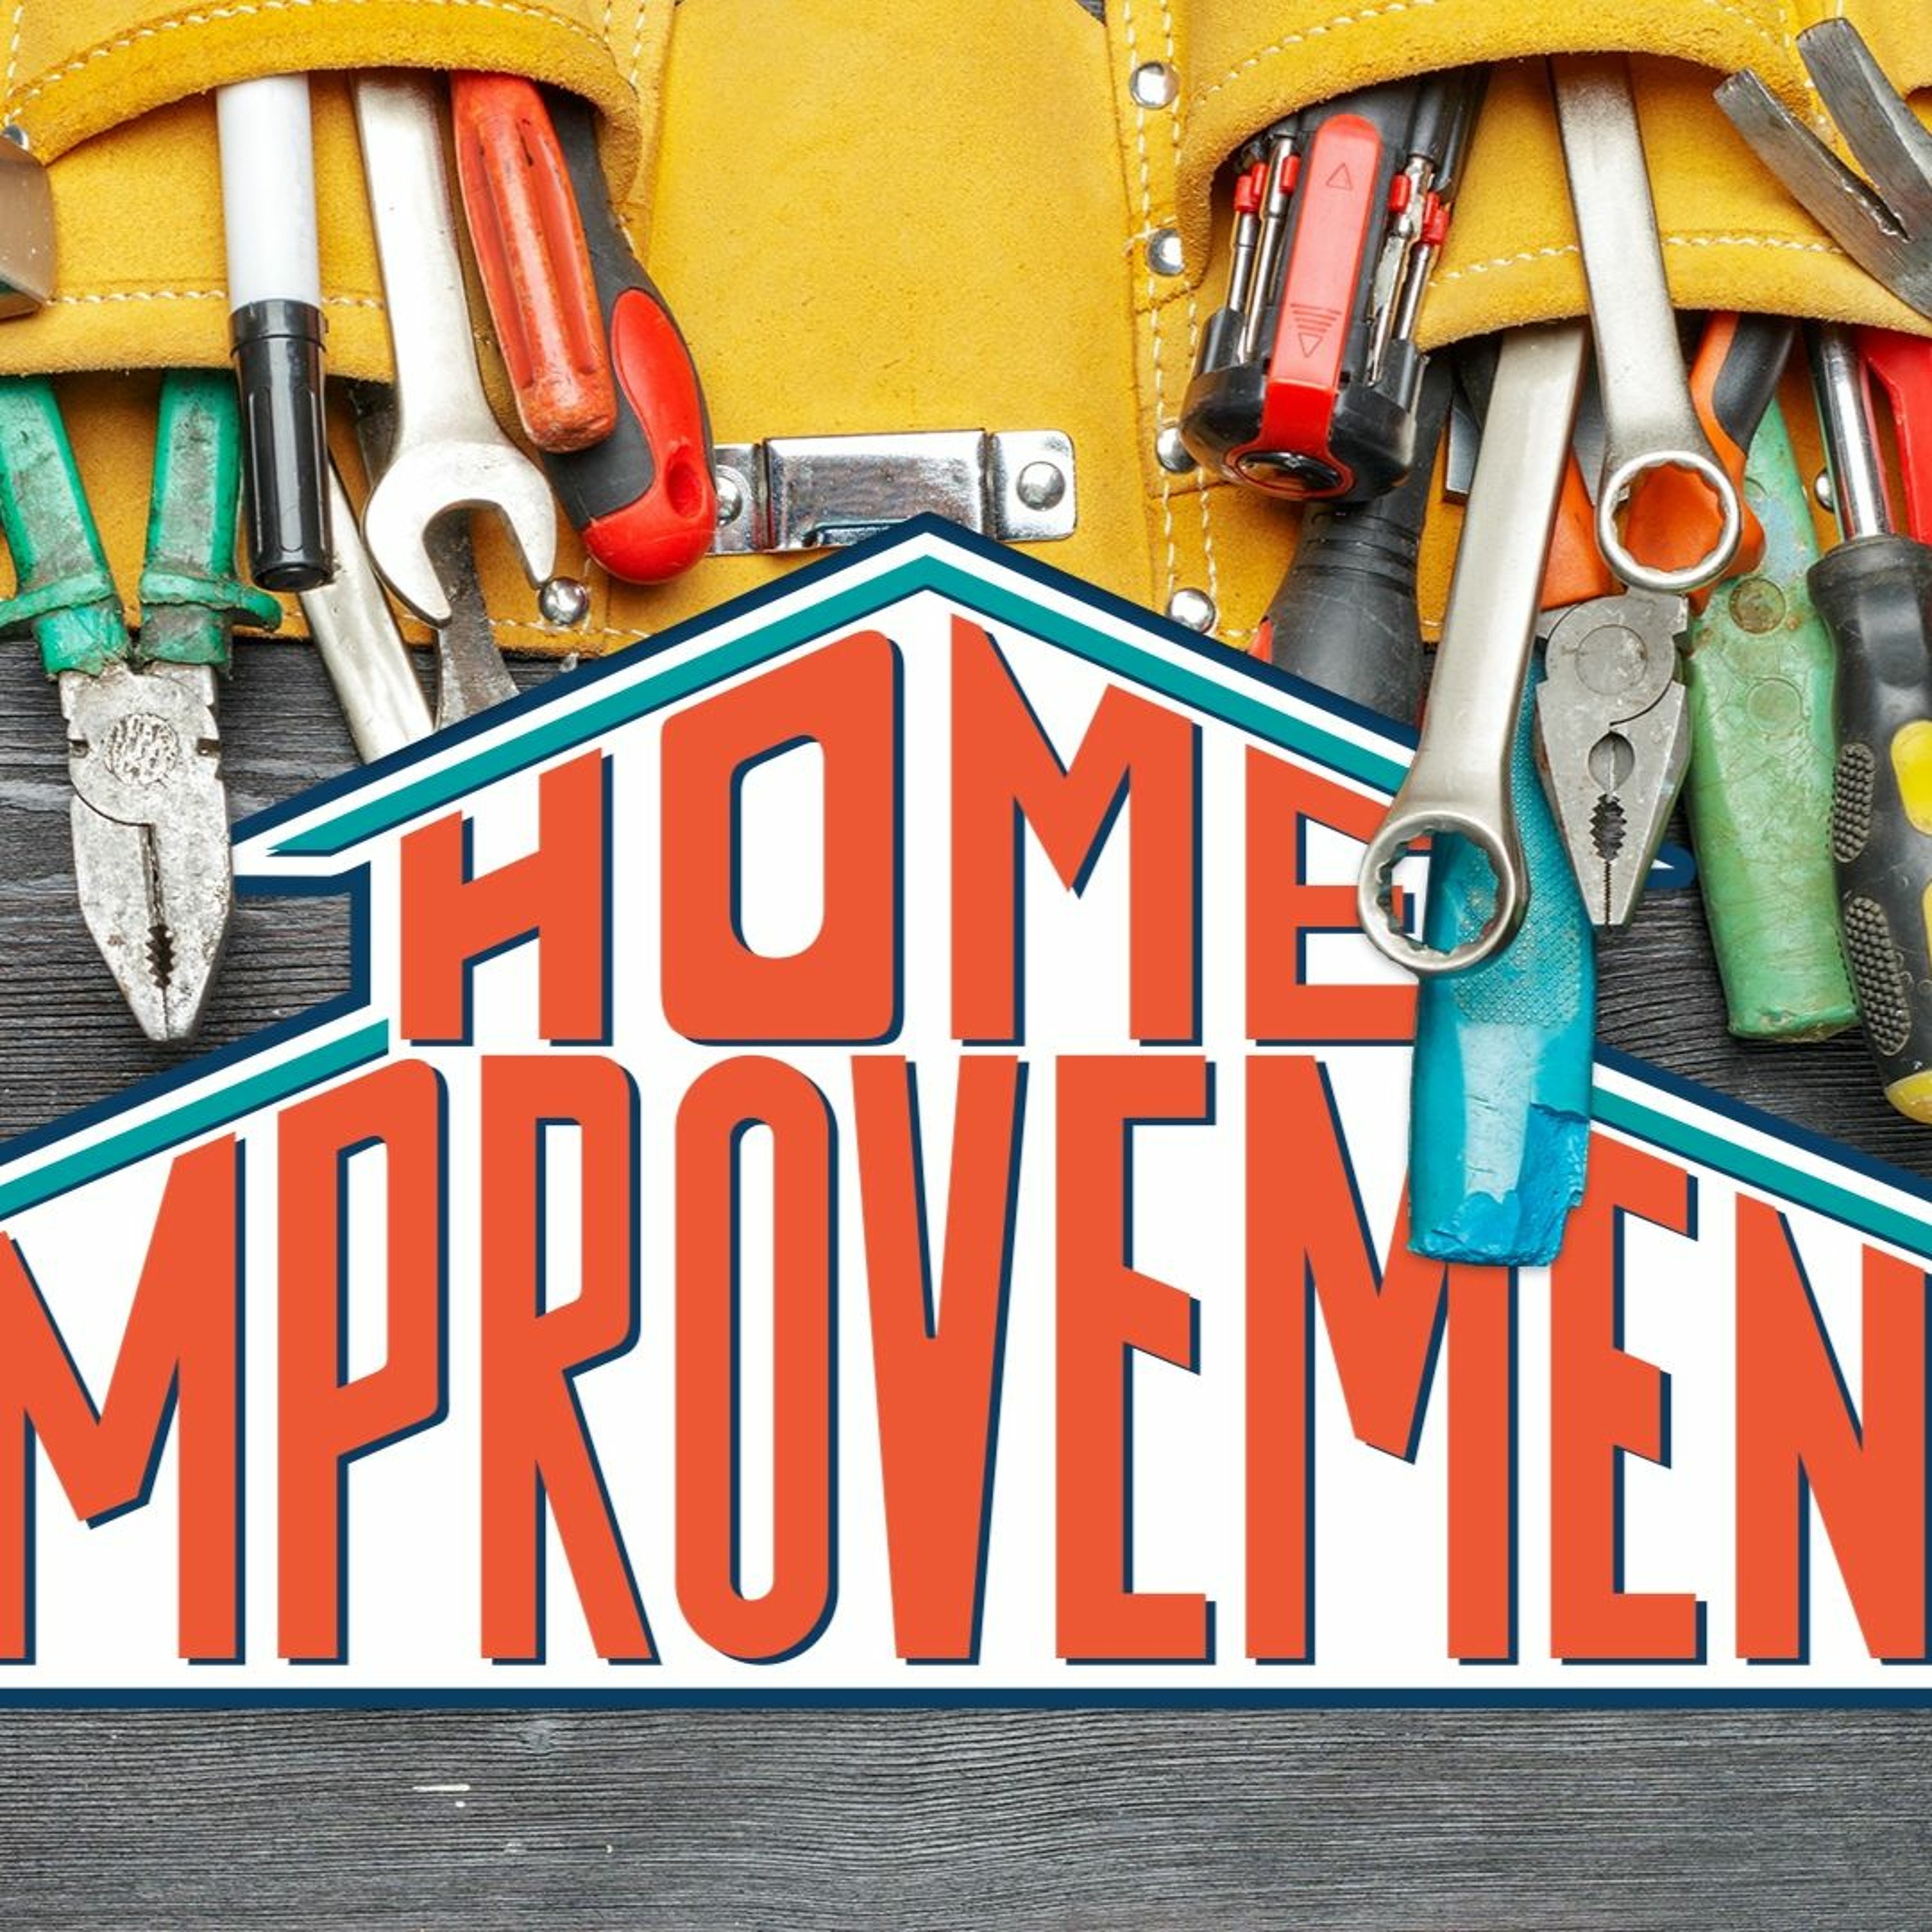 Kitchen/Service | Home Improvement | Ethan Magness